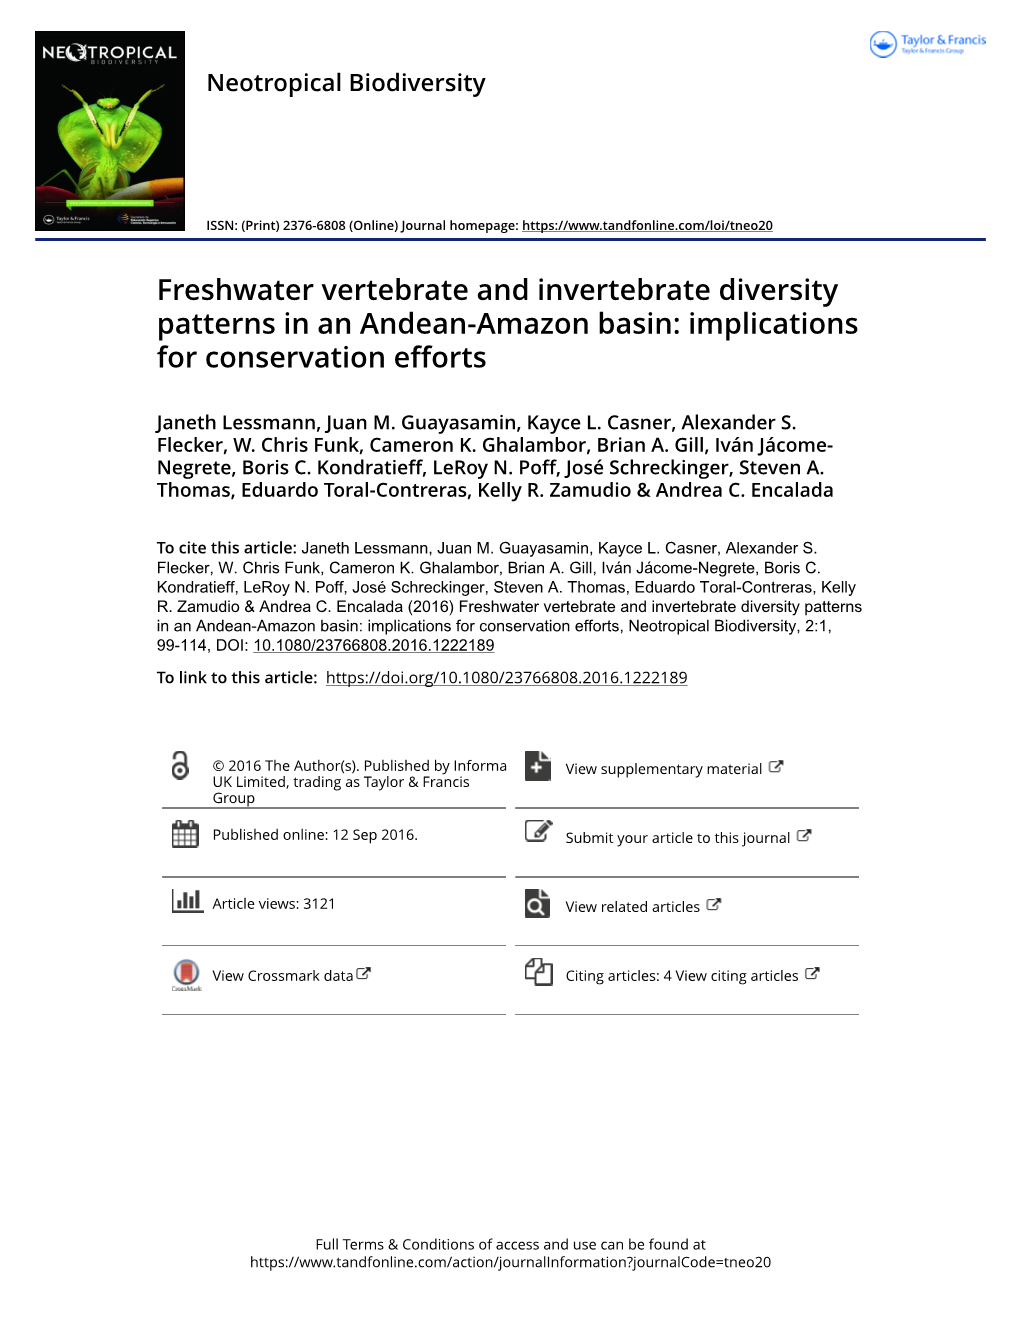 Freshwater Vertebrate and Invertebrate Diversity Patterns in an Andean-Amazon Basin: Implications for Conservation Efforts